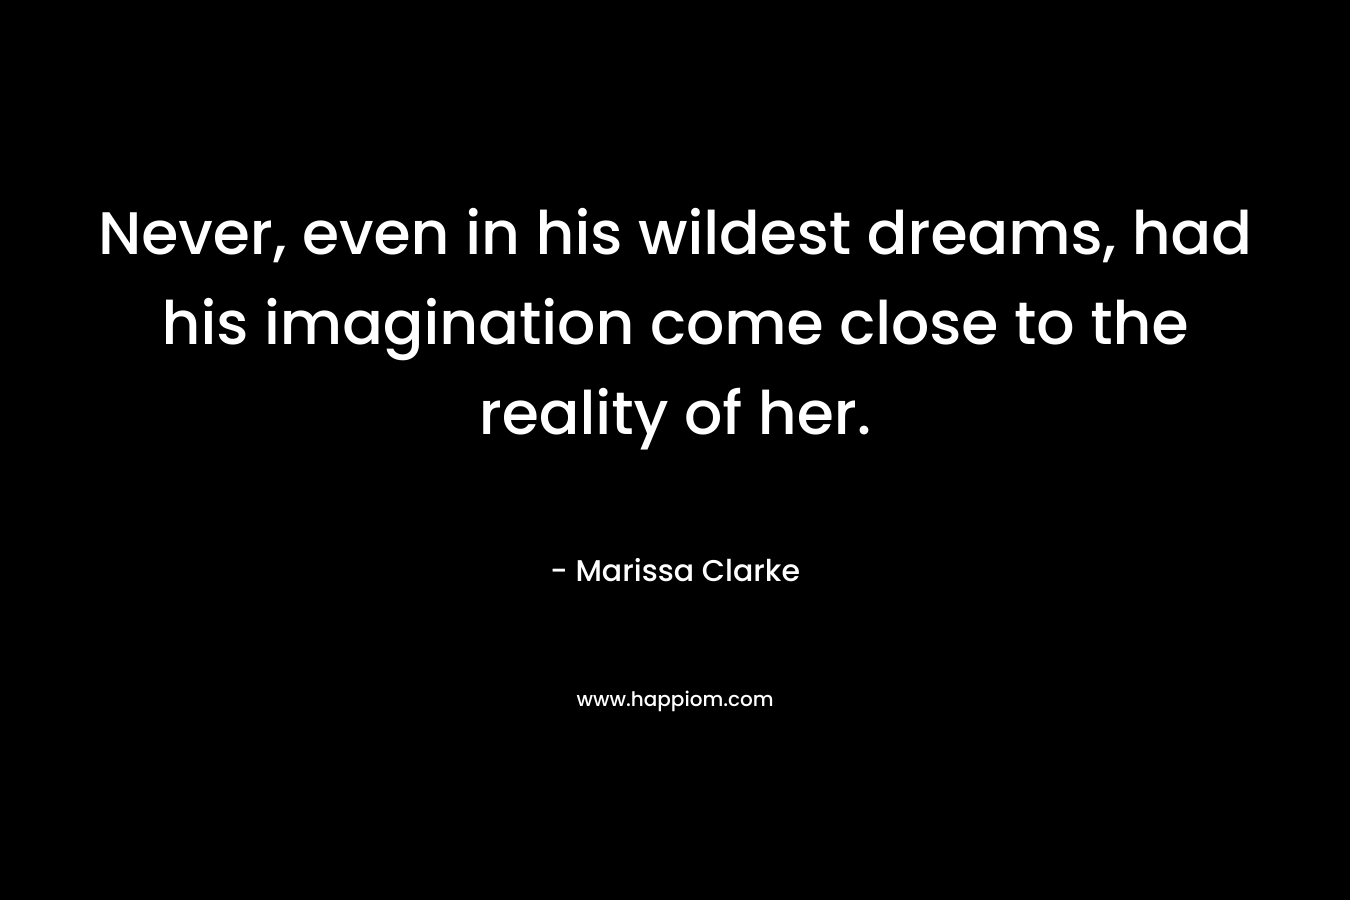 Never, even in his wildest dreams, had his imagination come close to the reality of her. – Marissa Clarke